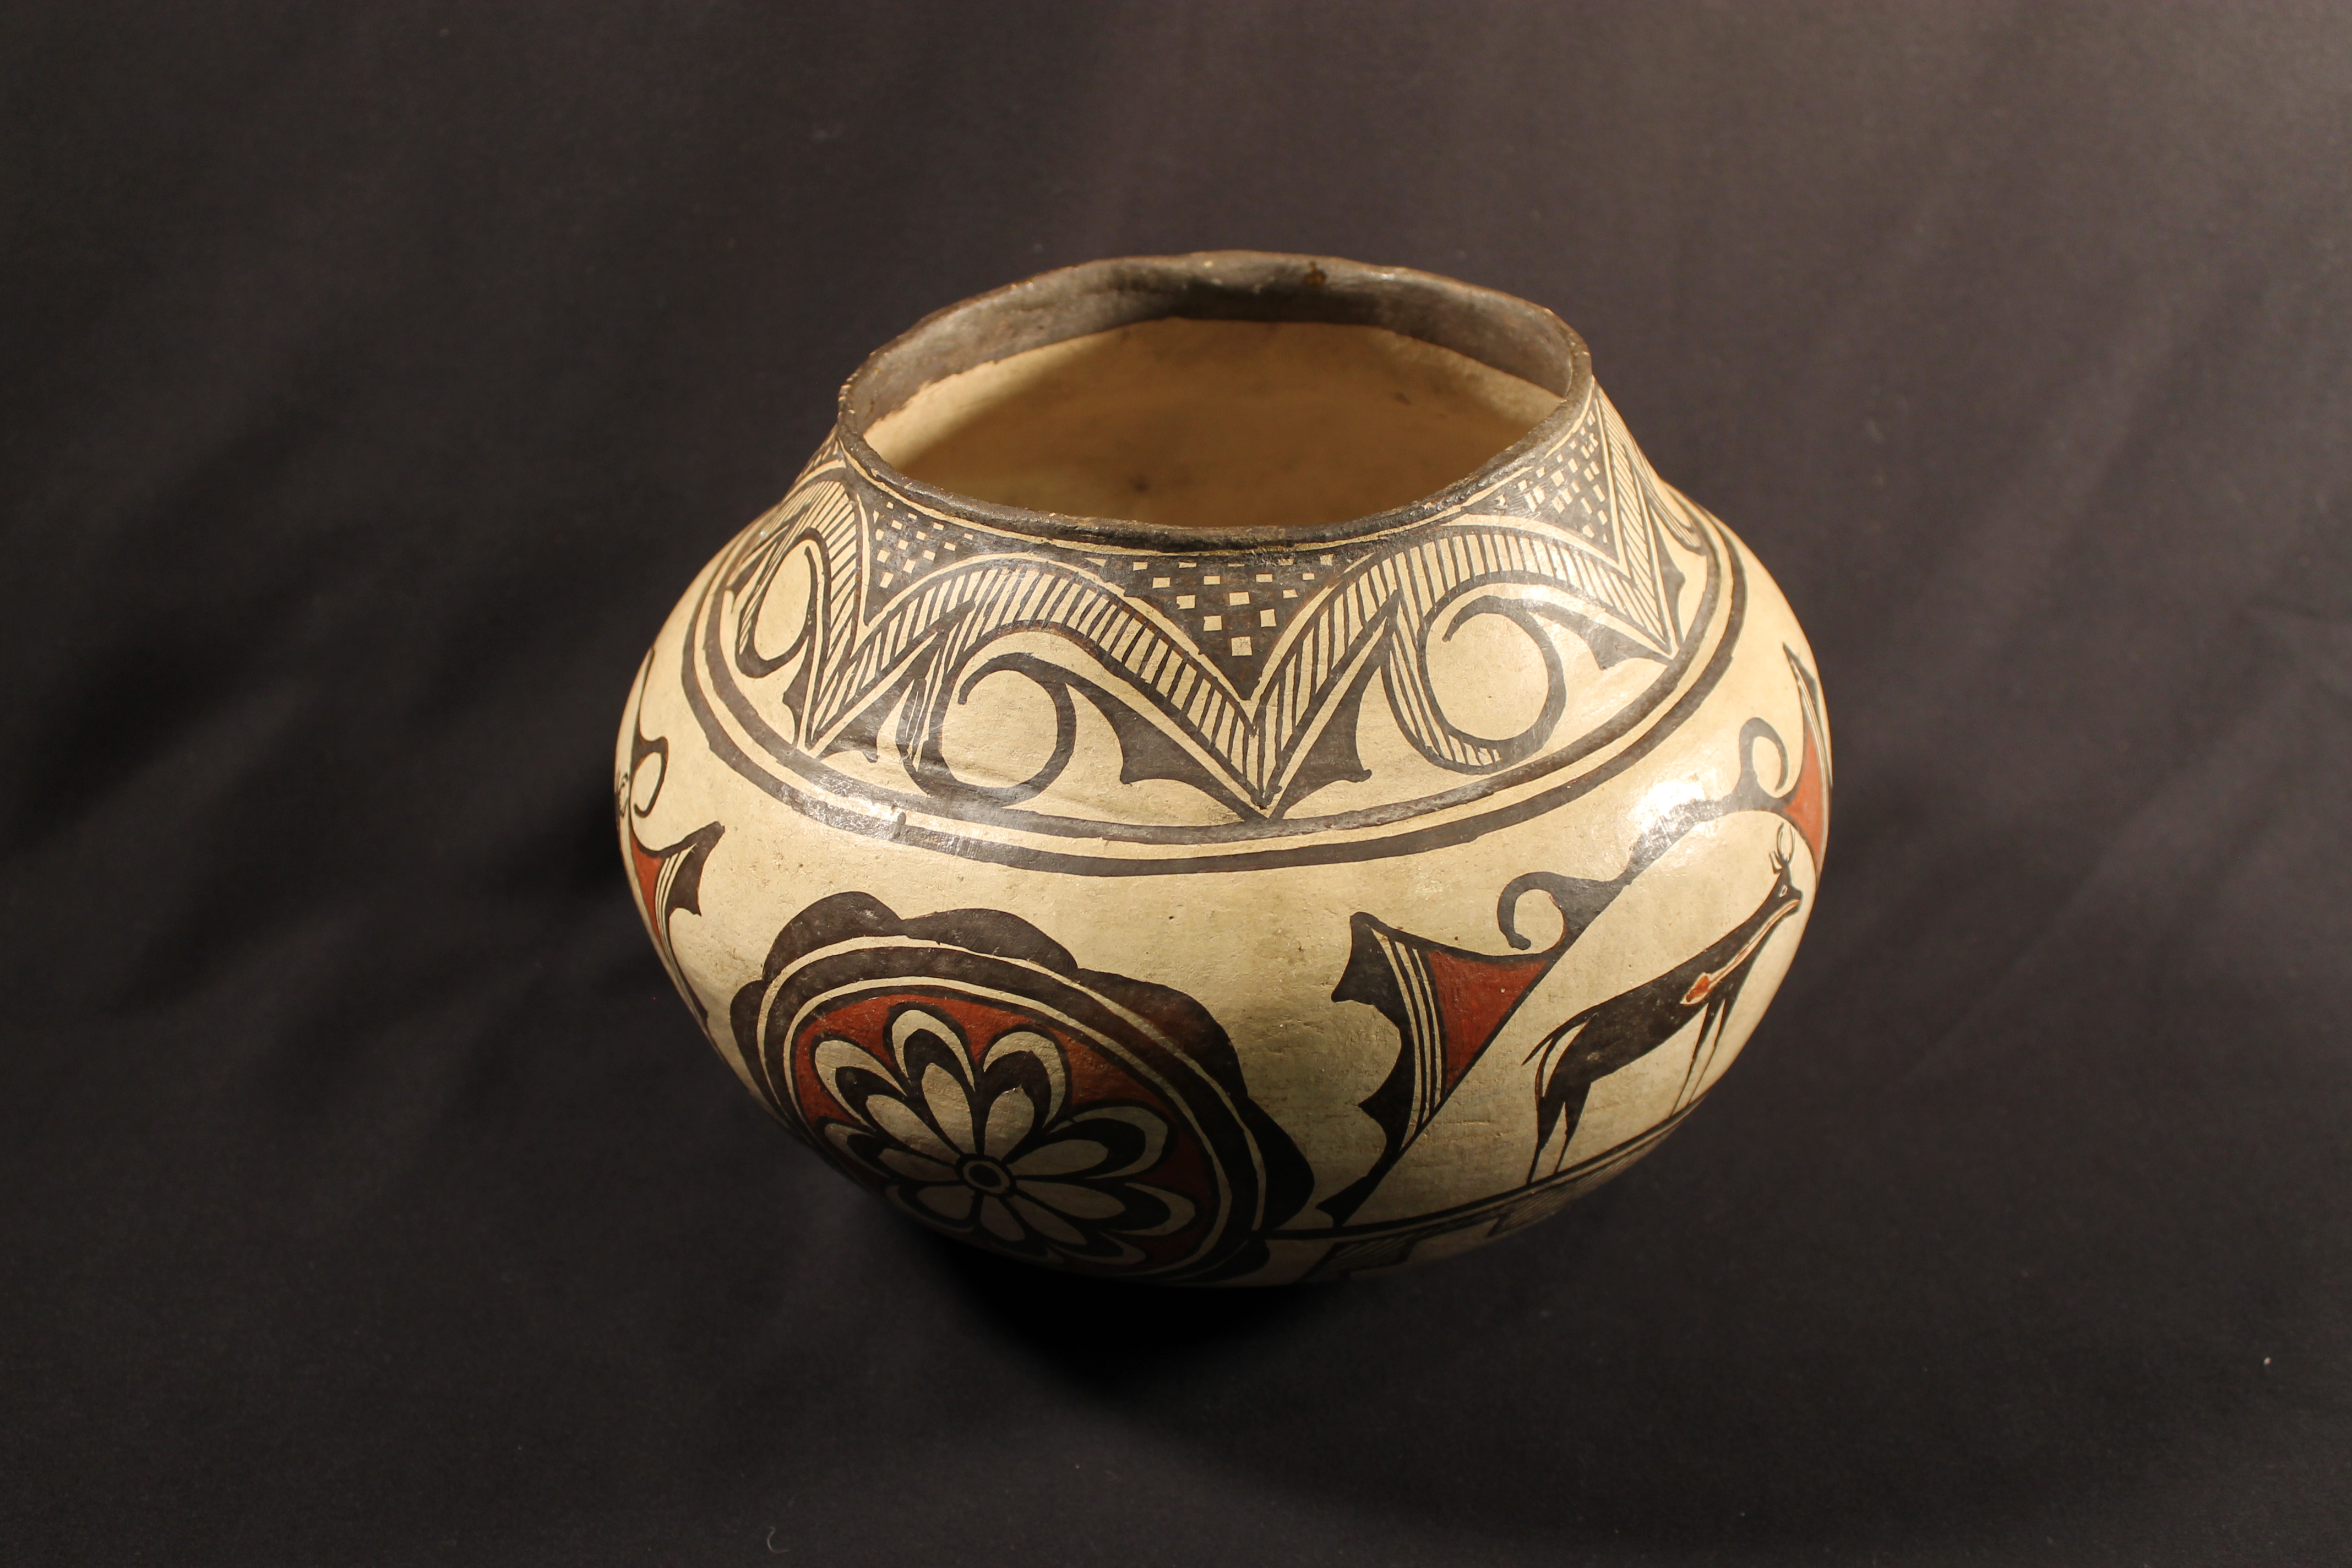 Pottery with red and black design of 3 deer and 3 rosettes on a cream back drop with a break in the upper banding lines